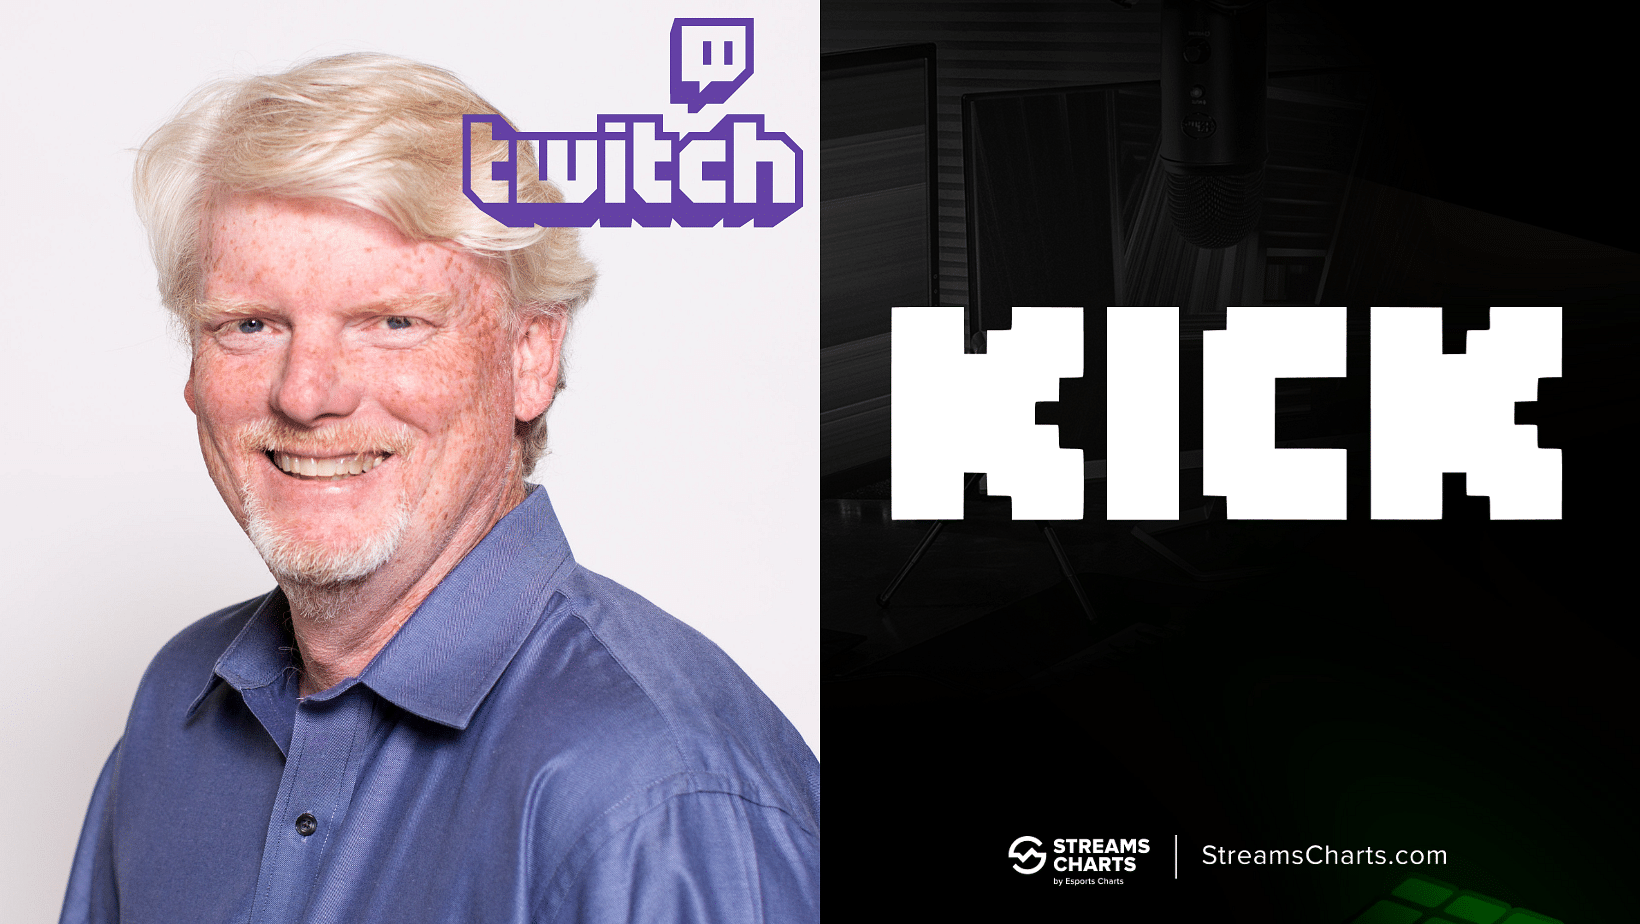 An illustration featuring the Twitch CEO Dan Clancy and the logo of the streaming platform Kick